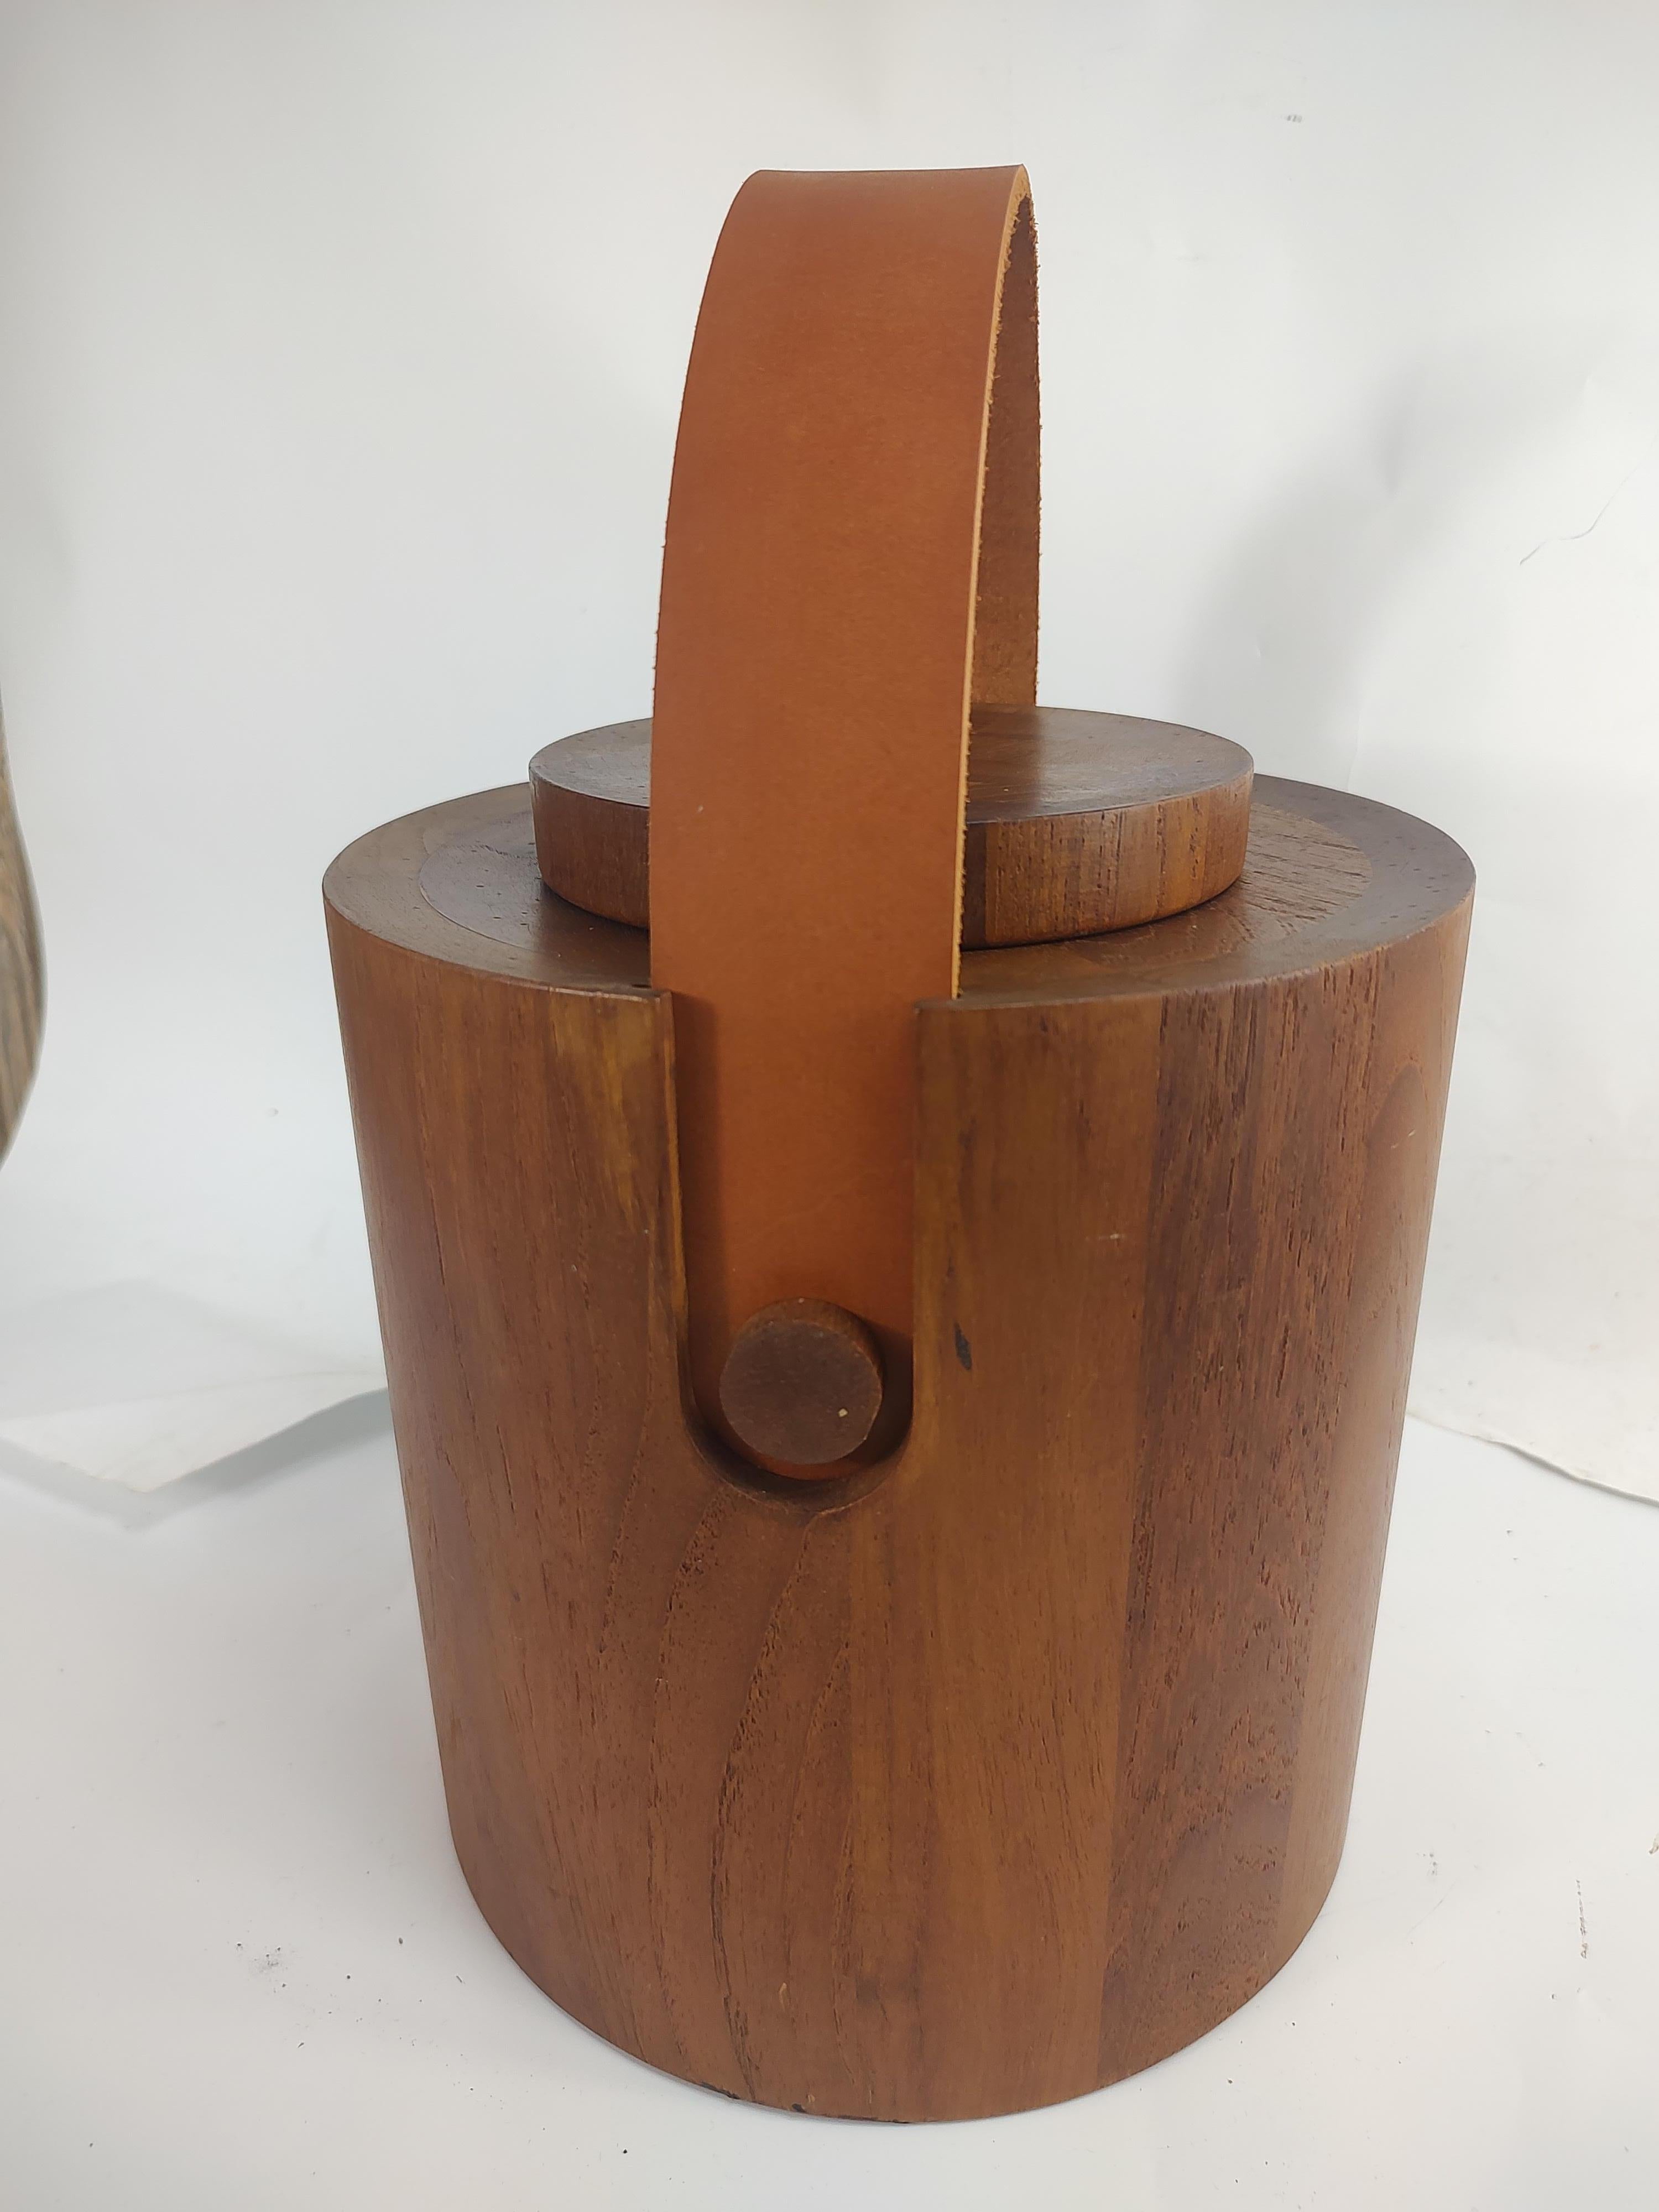 Turned Mid Century Modern Teak Ice Bucket with a Leather Strap by Nessen C1960 Denmark  For Sale